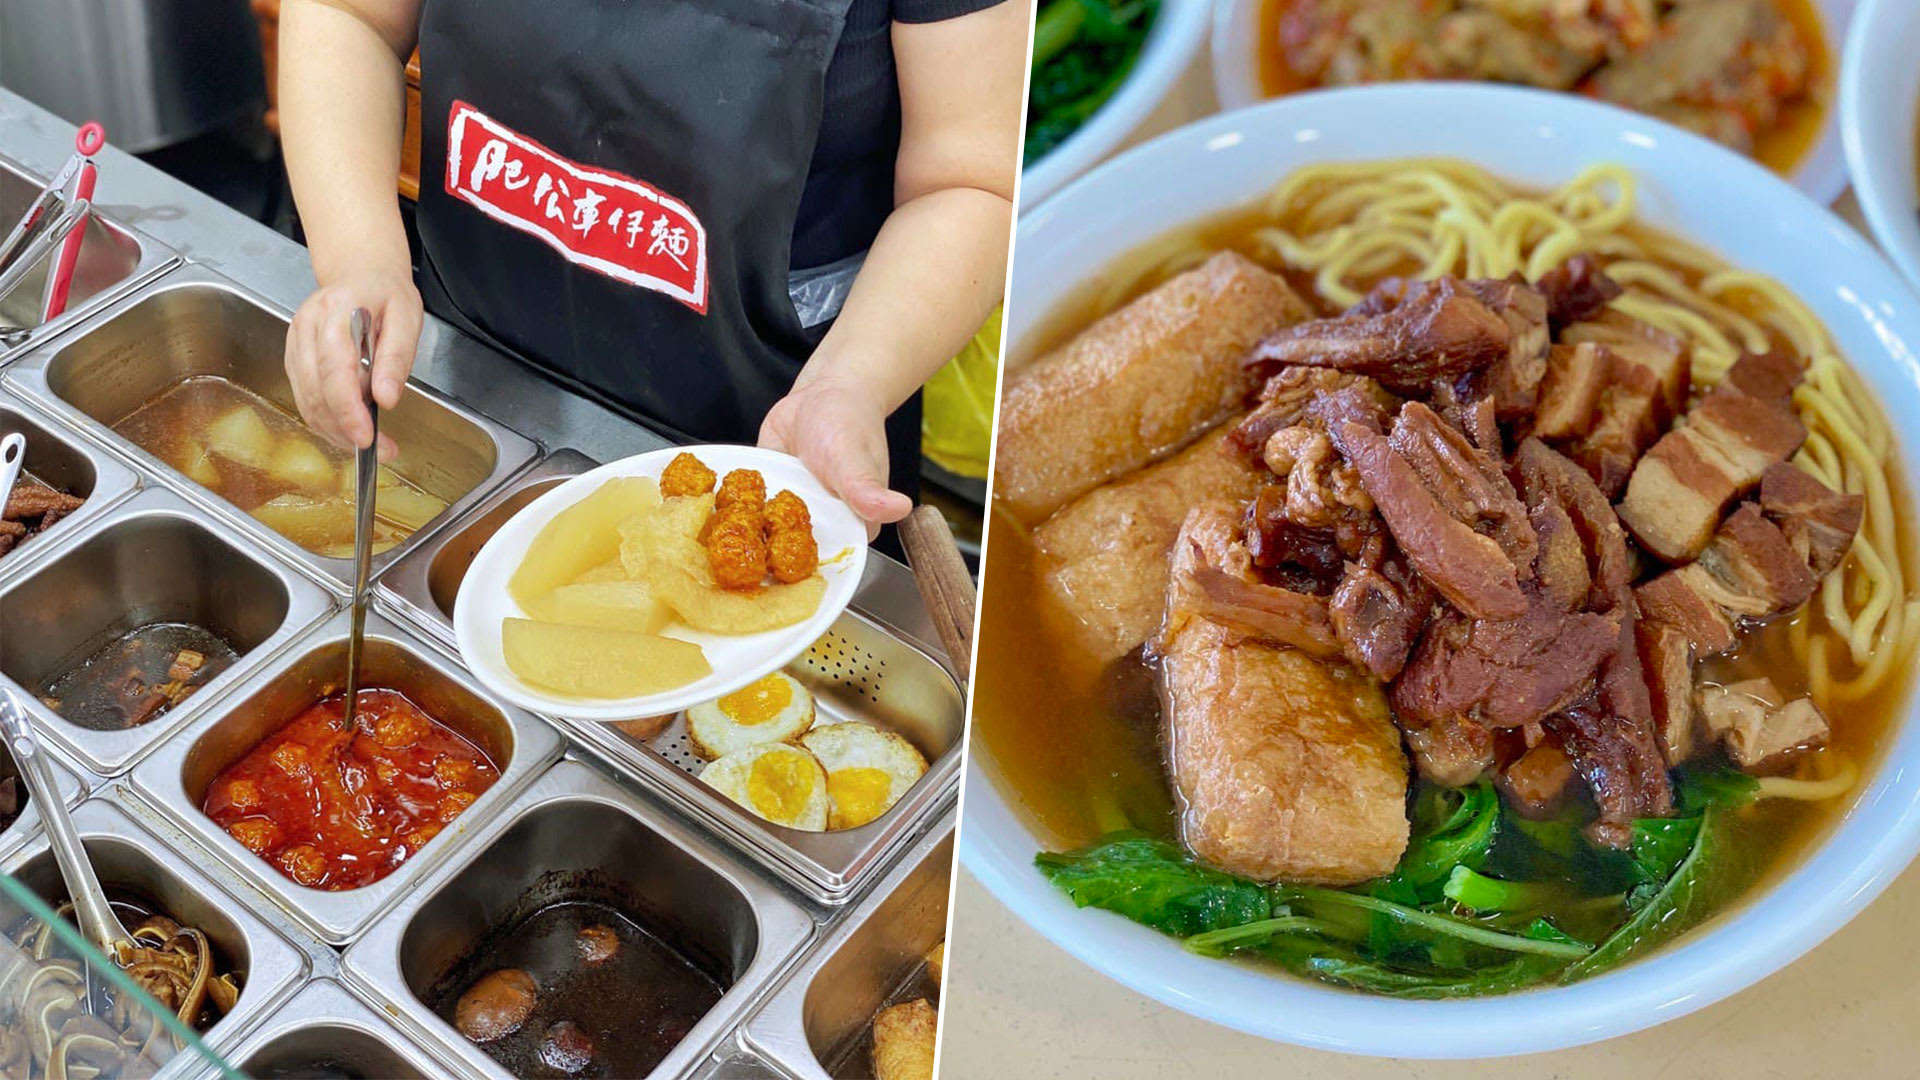 New Hawker Stall Sells Legit HK-Style Cart Noodles With 20 Customisable Toppings